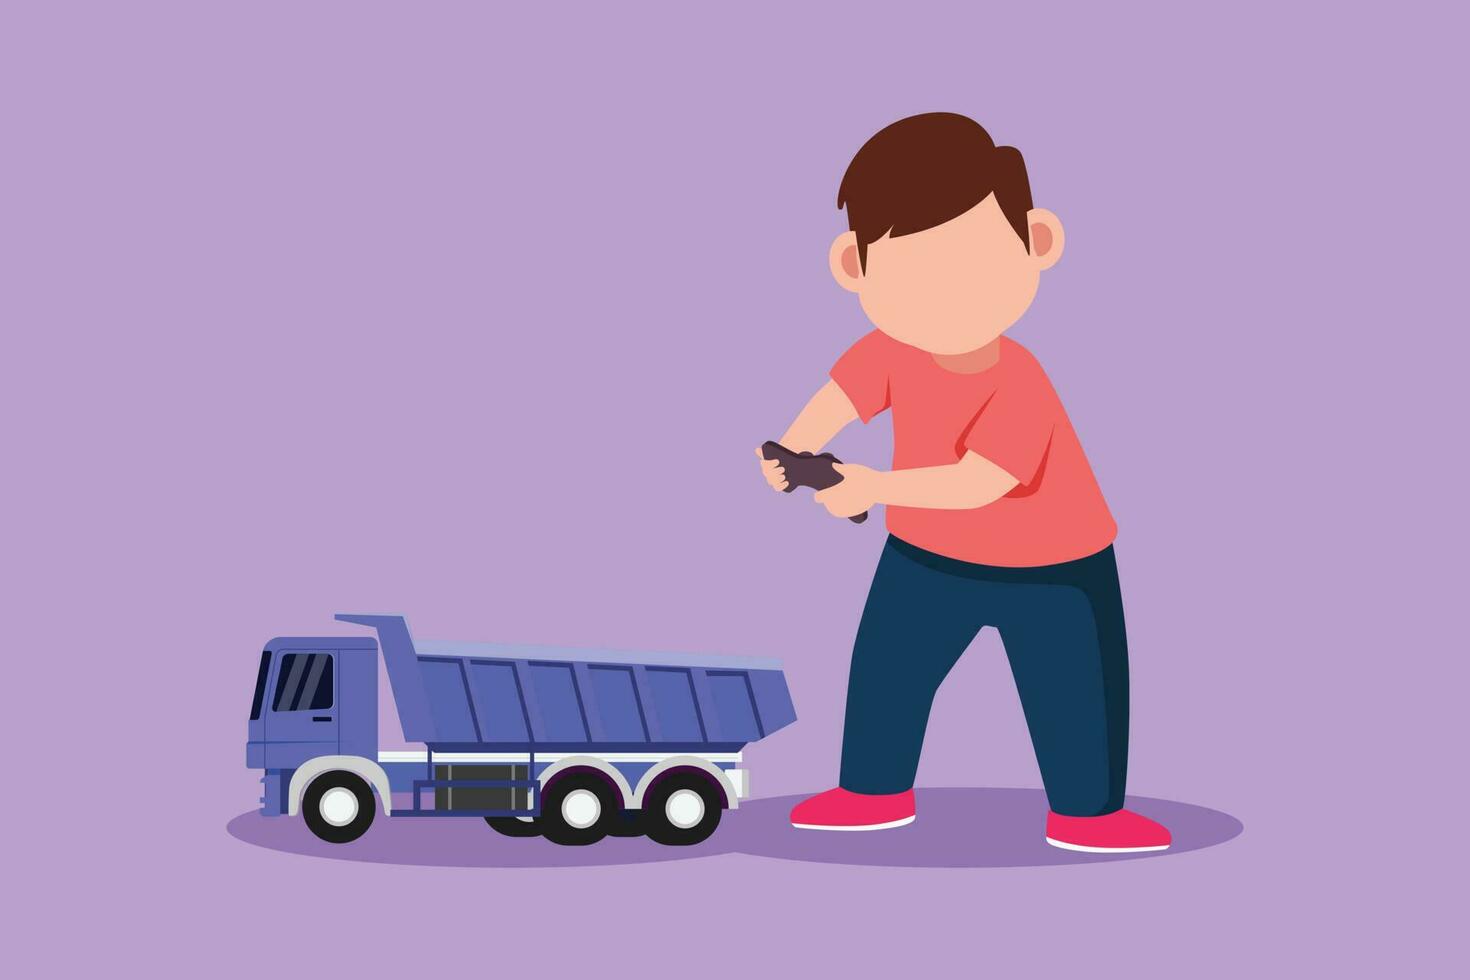 Graphic flat design drawing little boy playing with remote controlled dump truck toy. Cute kids playing with electronic dump truck toy with remote control in hands. Cartoon style vector illustration